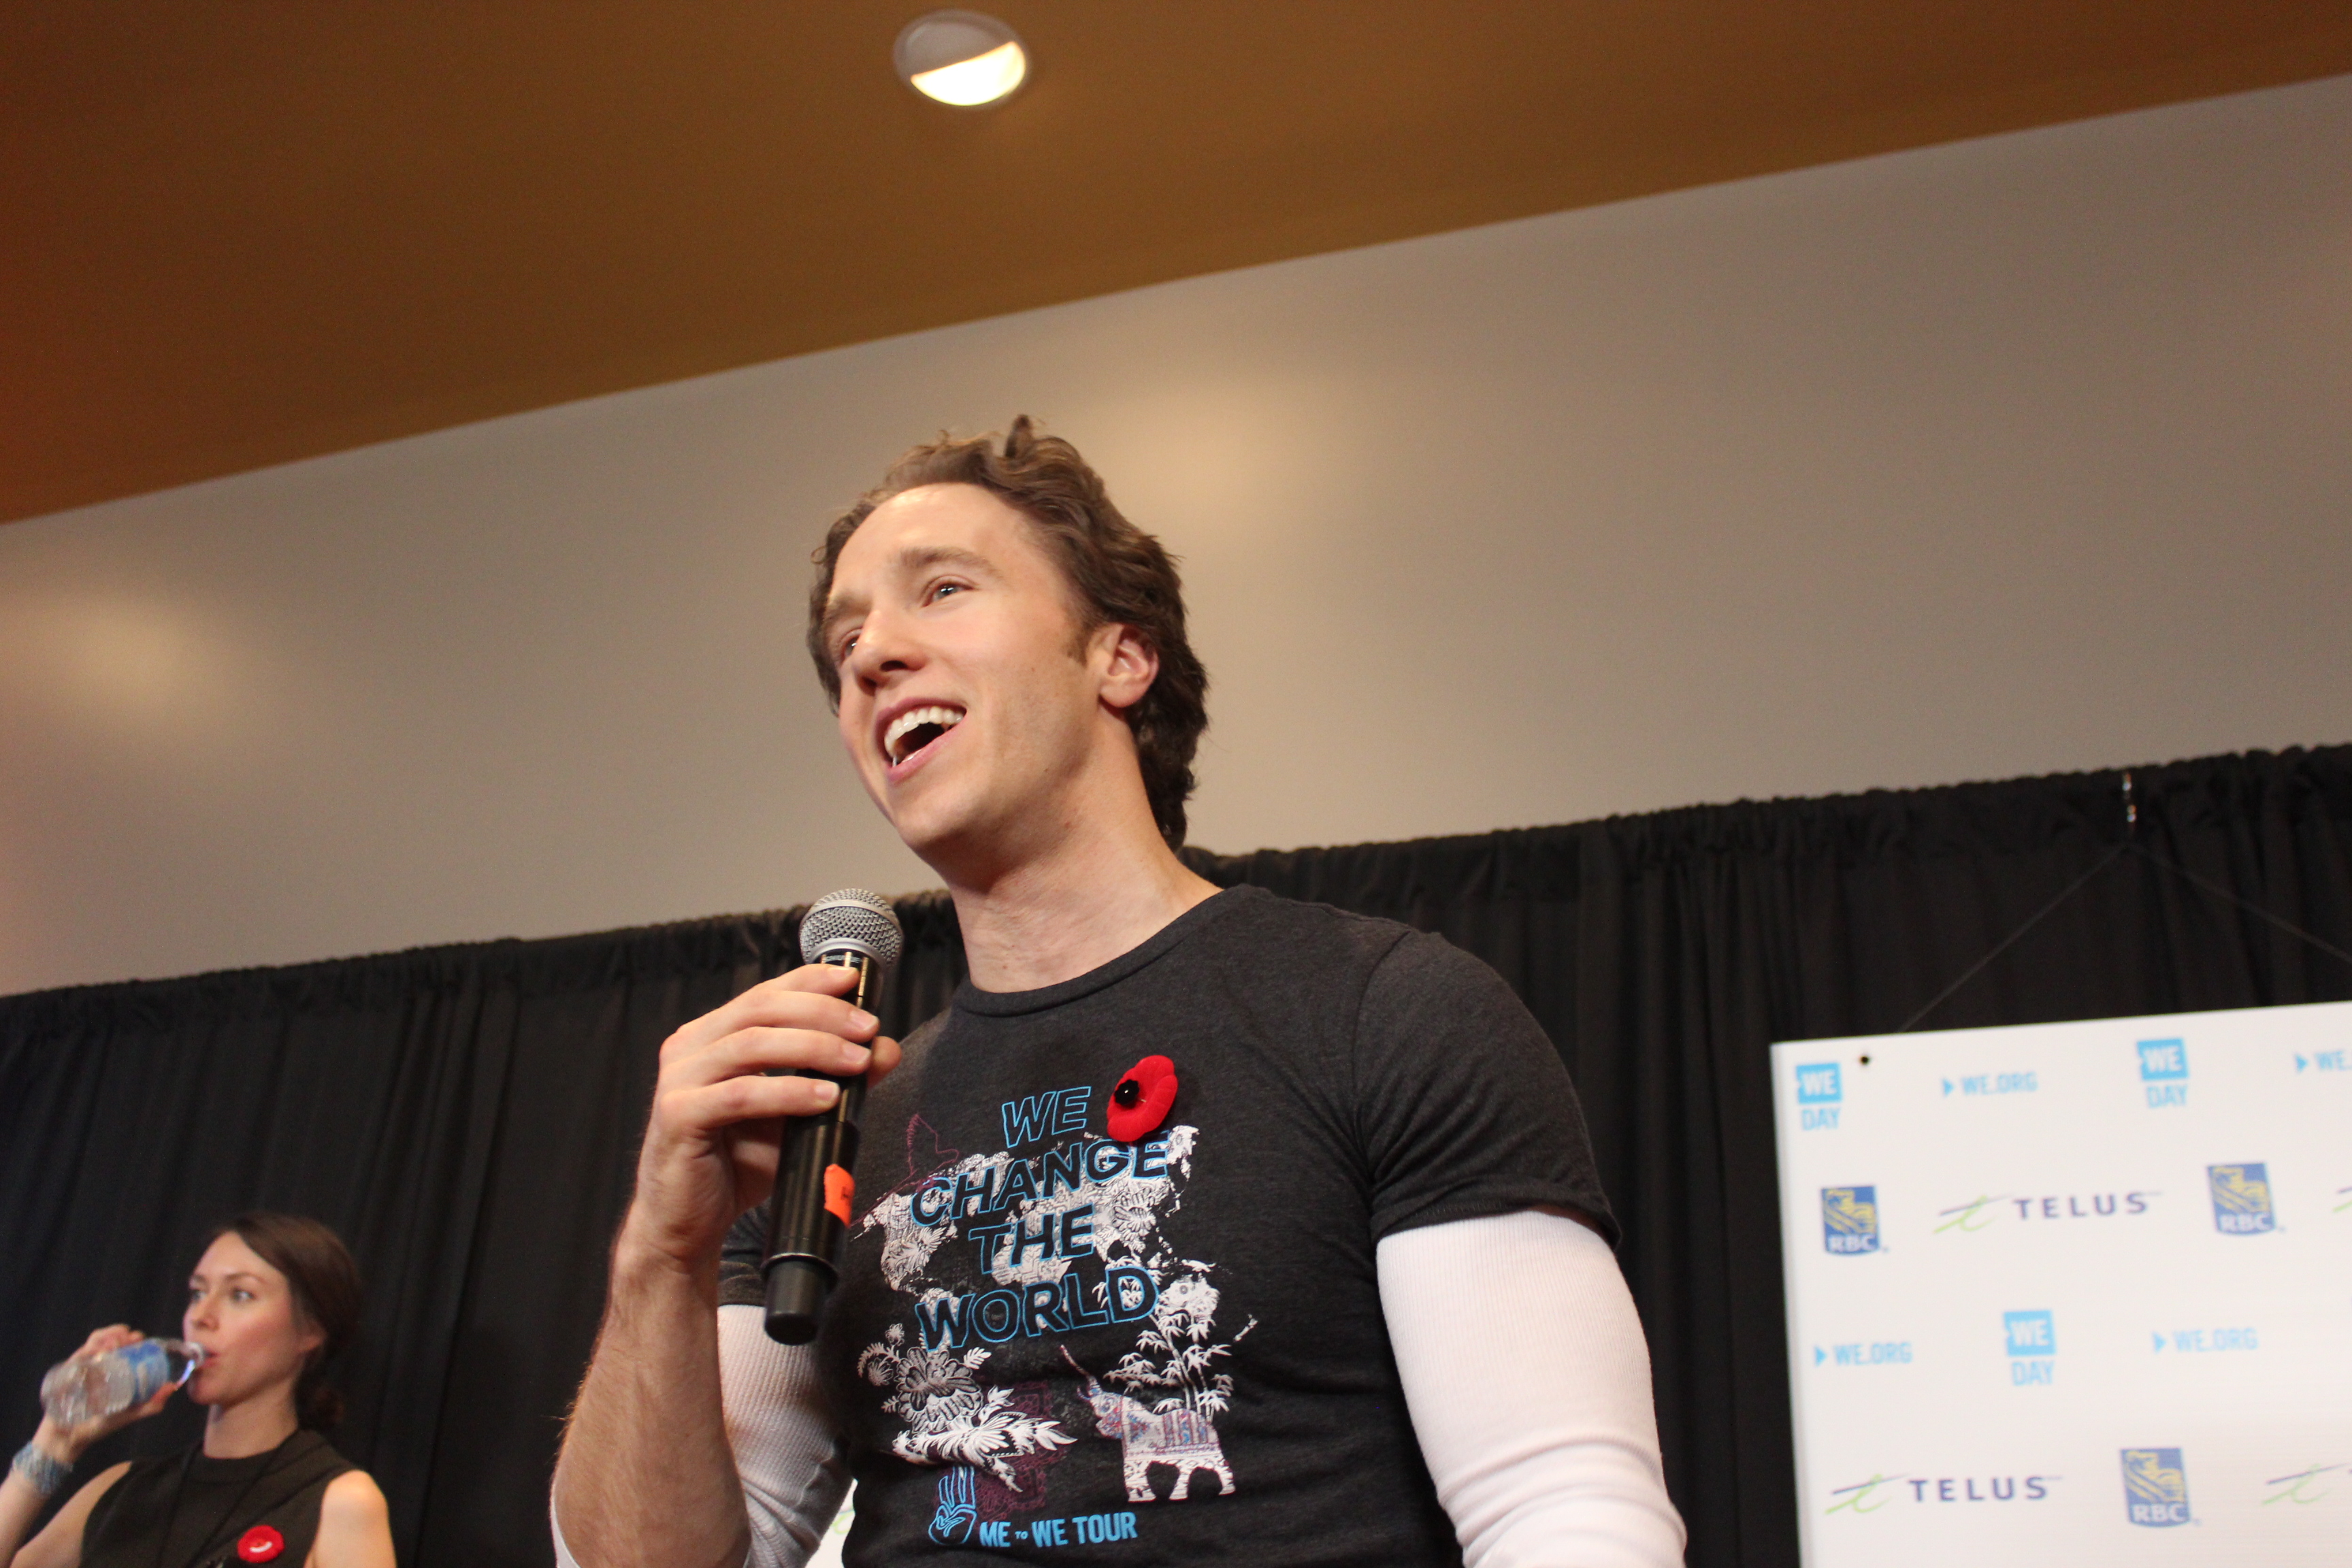 Craig Kielburger, founder of We Day, Free the Children and Me to We.